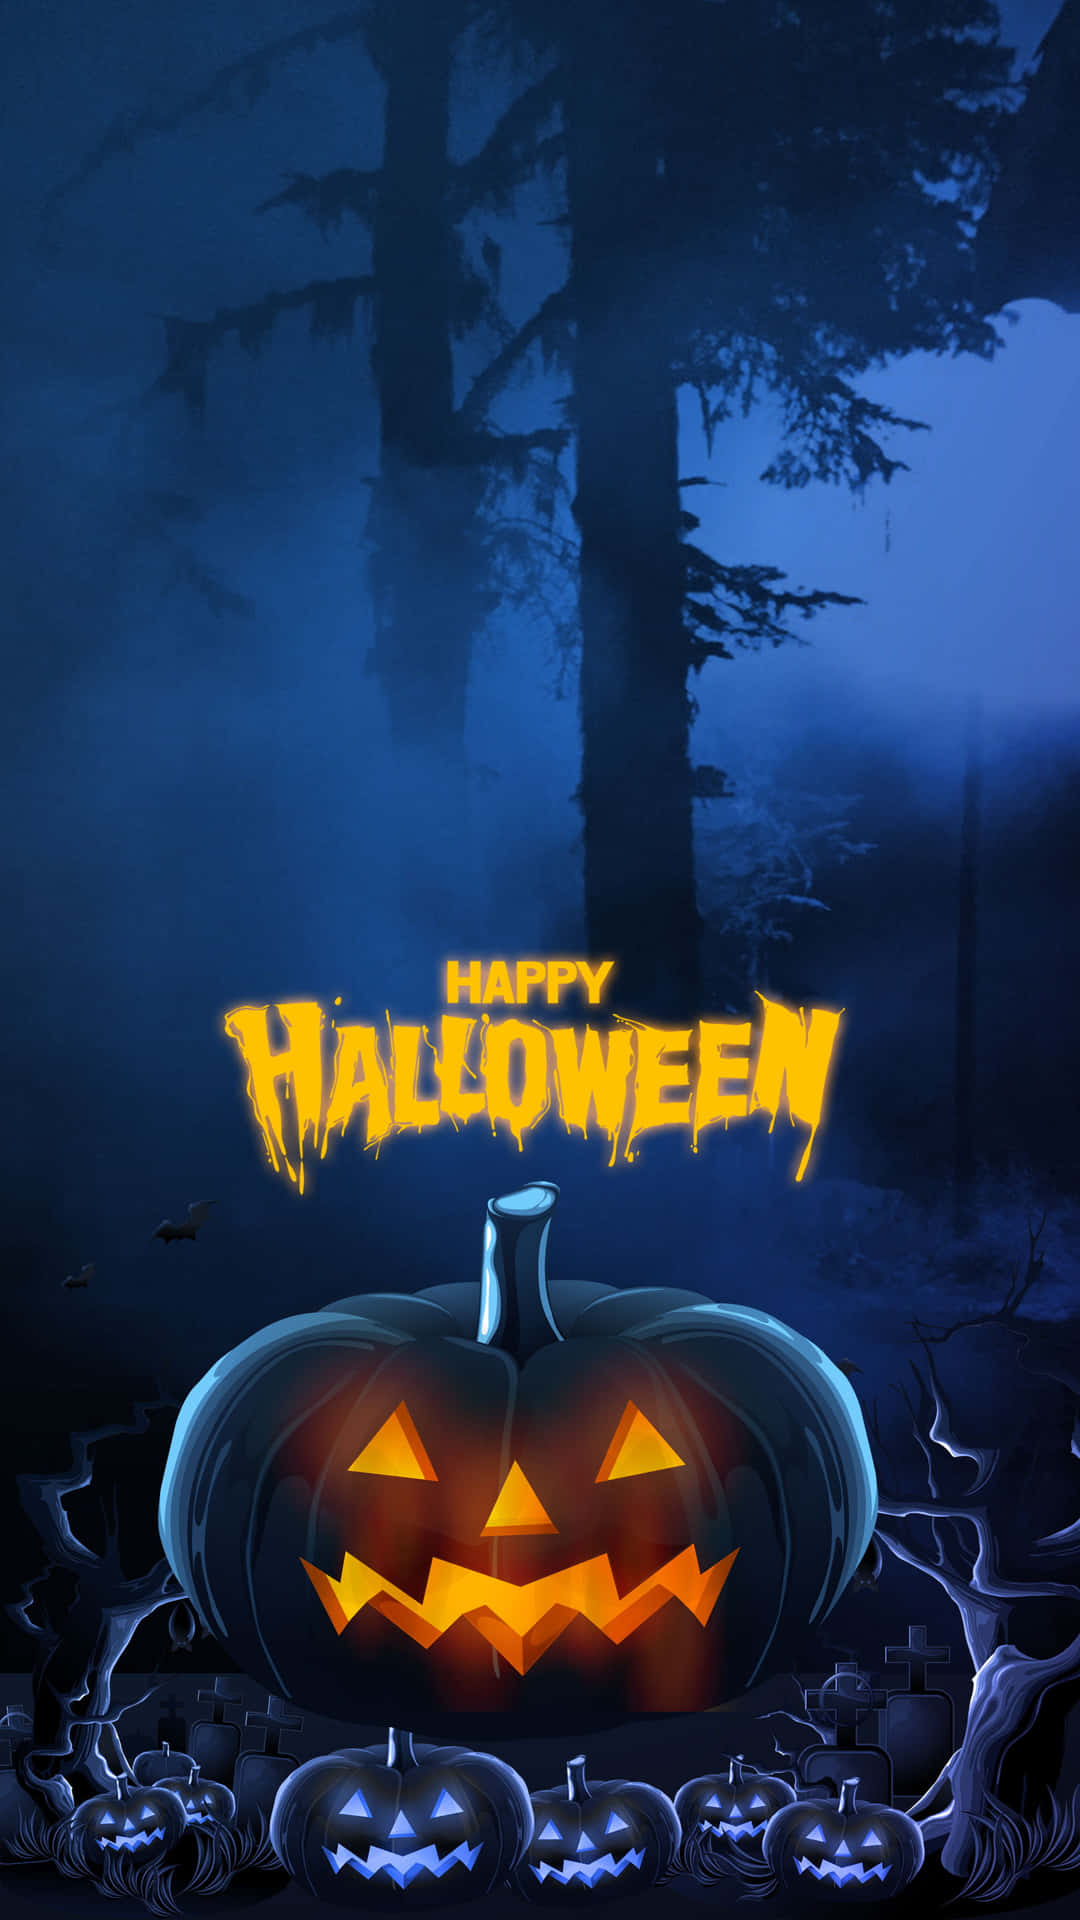 Get spooky this Halloween with an awesome background